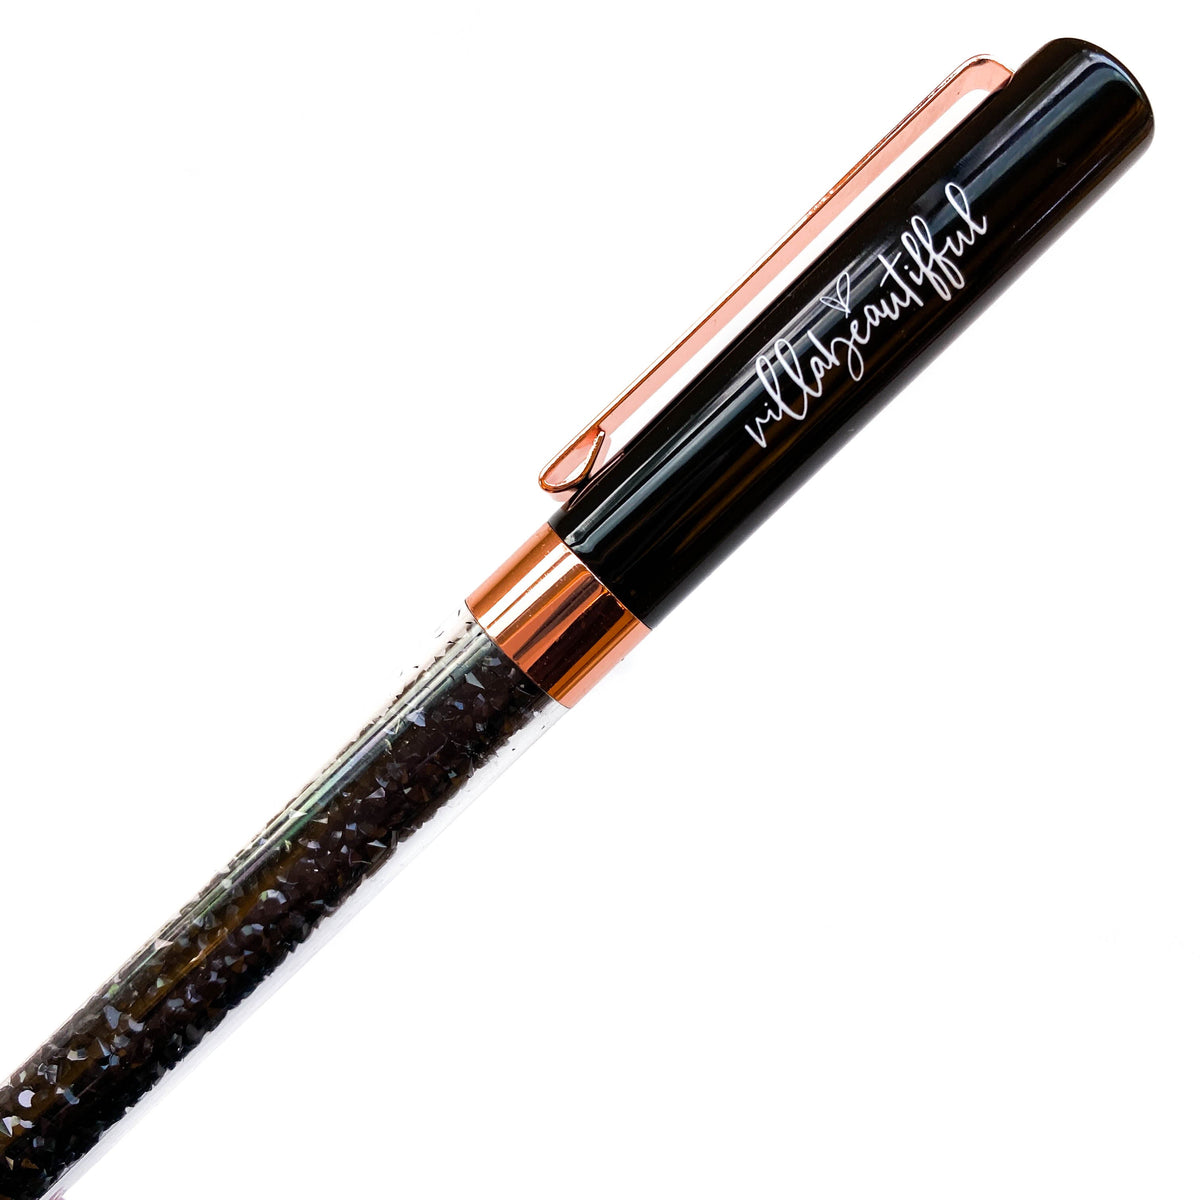 Midnight Rose 2.0 Imperfect Crystal VBPen | limited pen